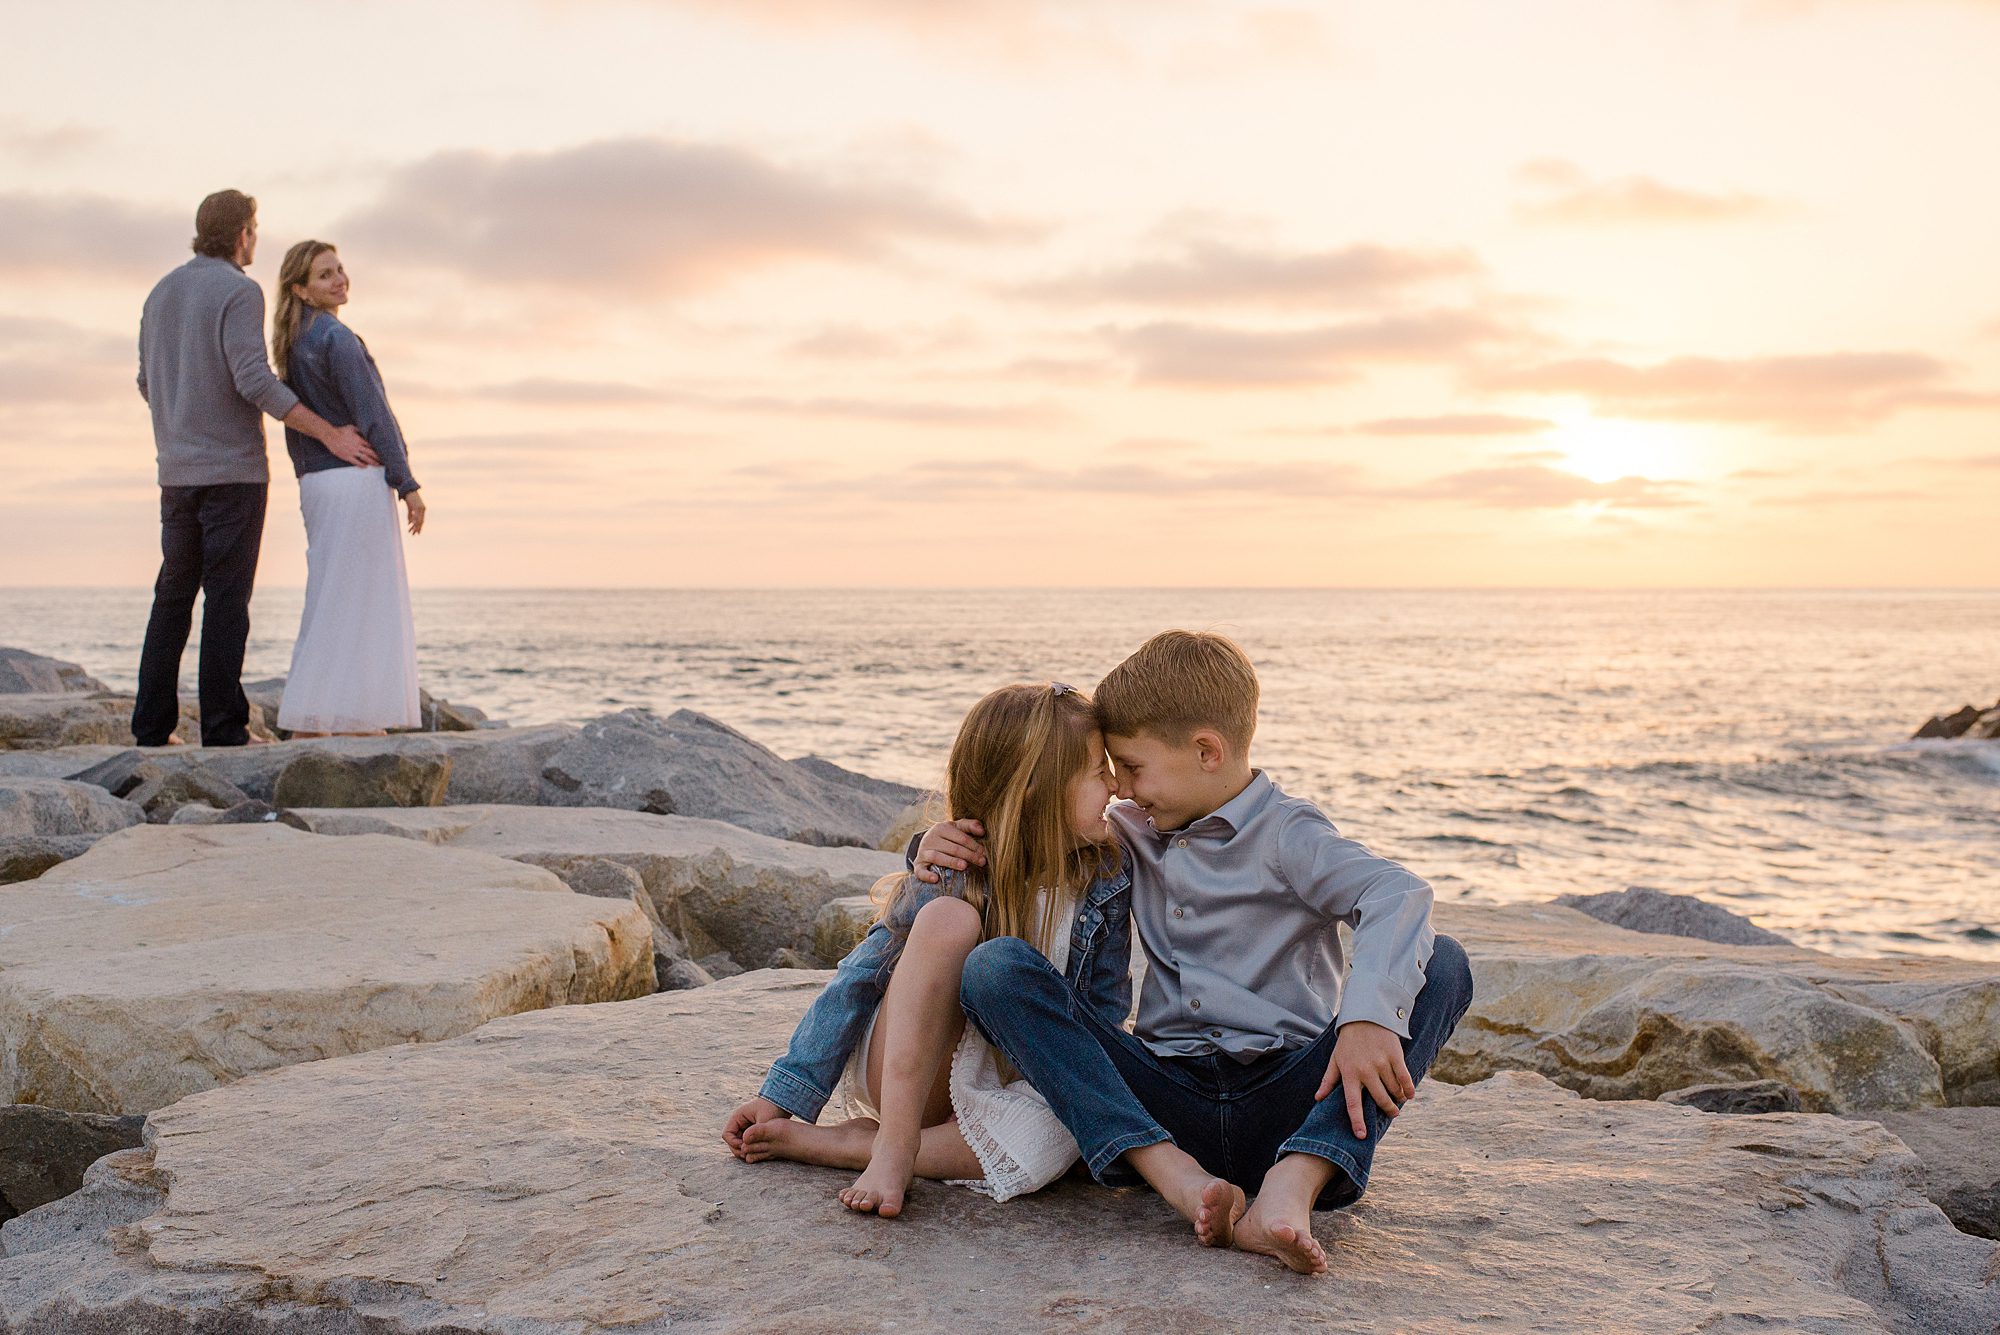 siblings sit together as parents look out at the ocean